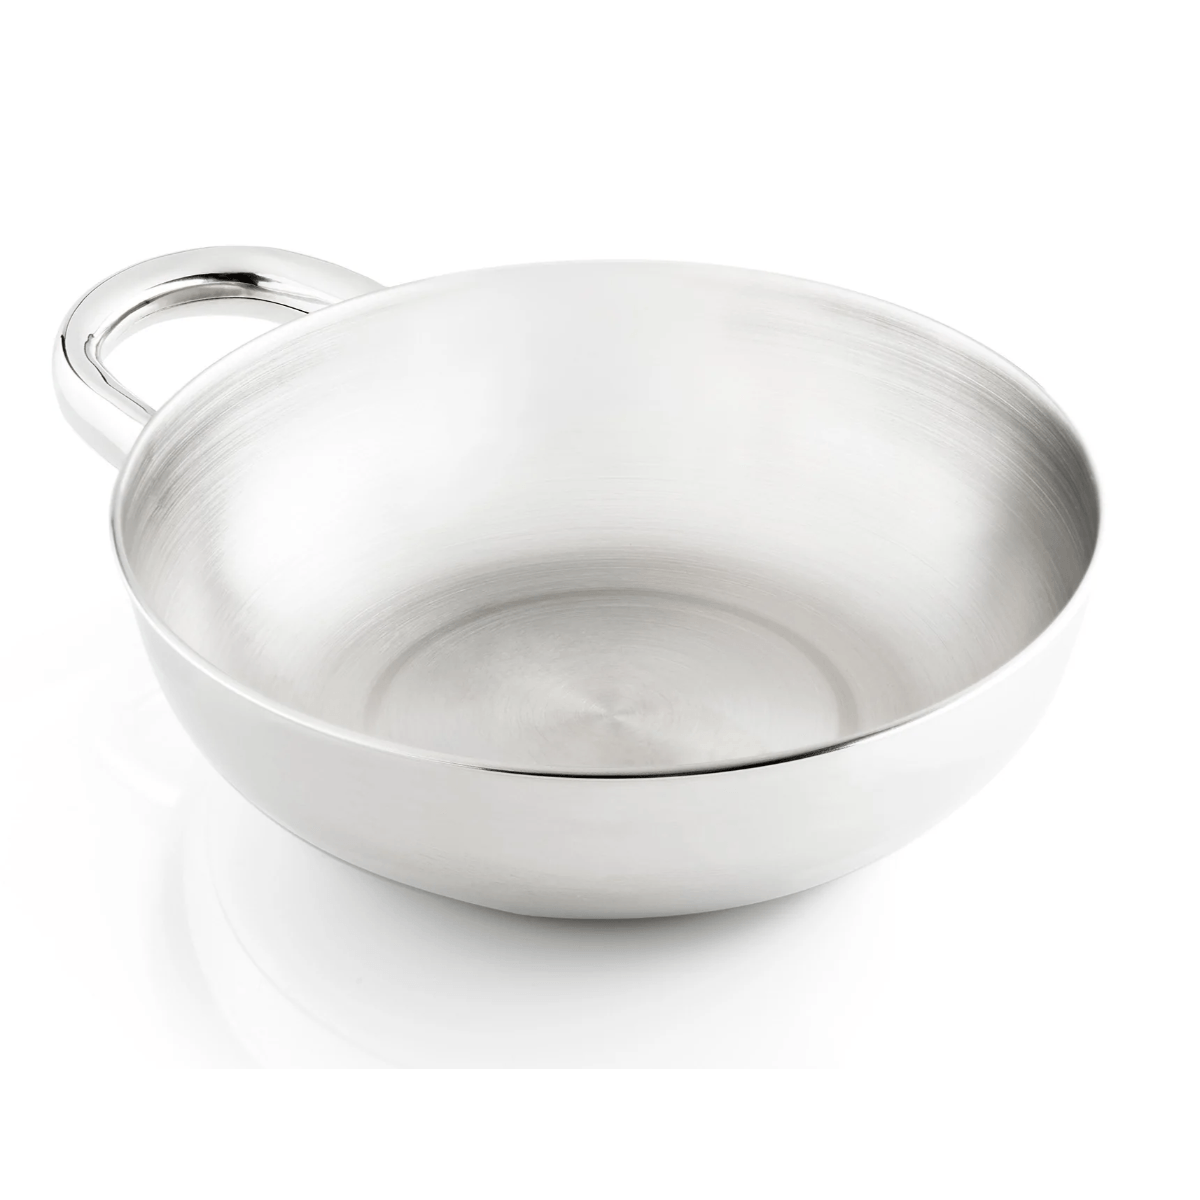 GSI Glacier Stainless Fry Pan, 10